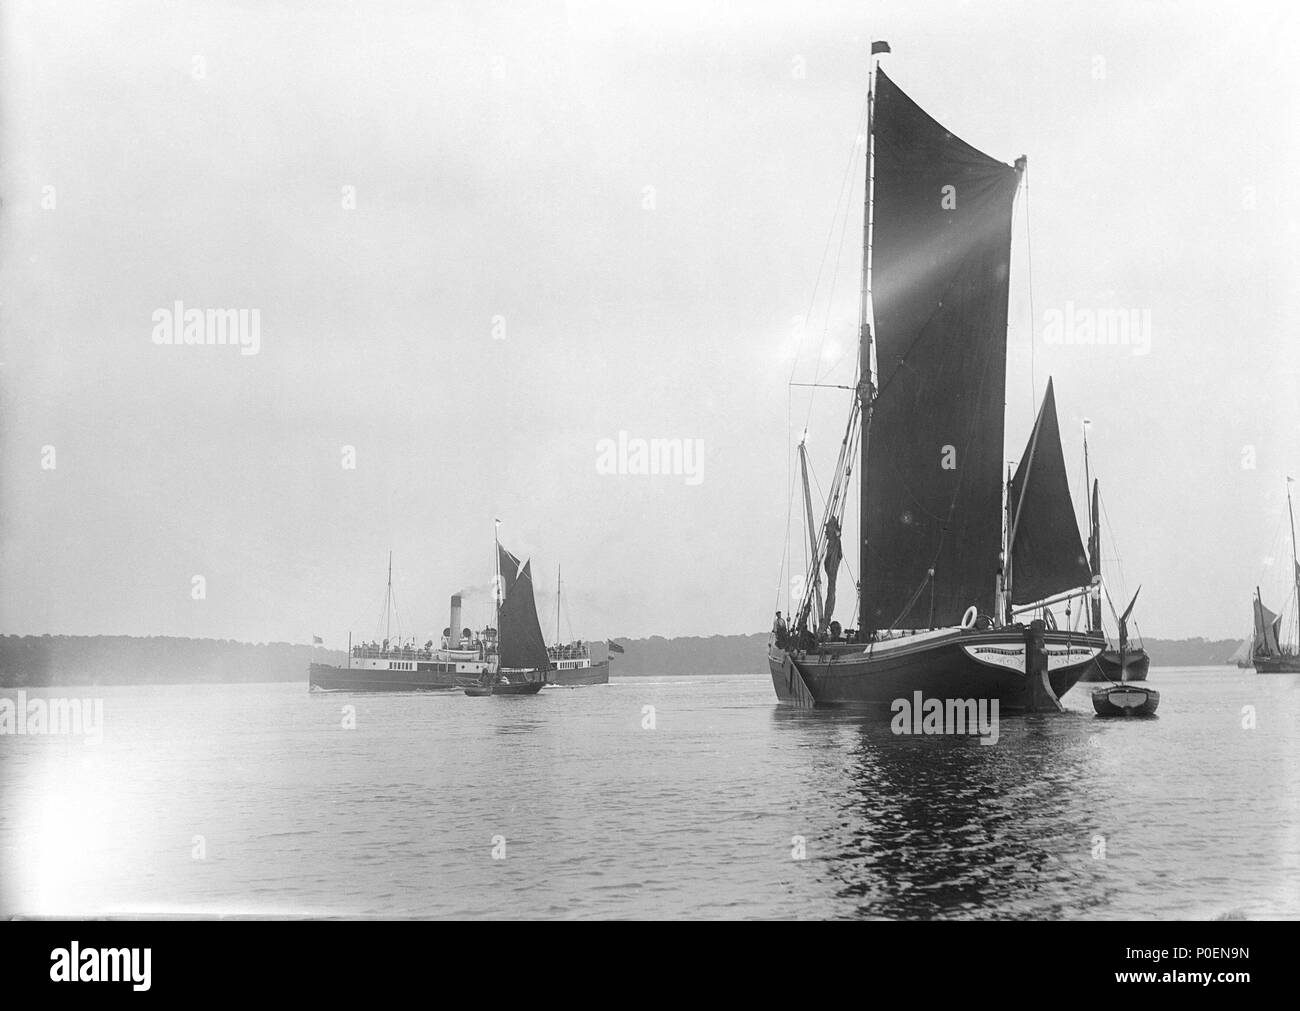 .  English: A view across the River Orwell from near Pin Mill with the spritsail barge 'Freston Tower' (1889) in the foreground. A general view looking across the River Orwell from near Pin Mill. In the foreground is the spritsail barge 'Freston Tower' (1889) under main and mizzen sails, just masking an unidientified barge which is at anchor. The Great Eastern Railway ferry 'Sussex' (1895) is passing a gaff-rigged yacht trailing a tender in the distance. A view across the River Orwell from near Pin Mill with the spritsail barge 'Freston Tower' (1889) in the foreground.  . circa 1904. Smiths Su Stock Photo